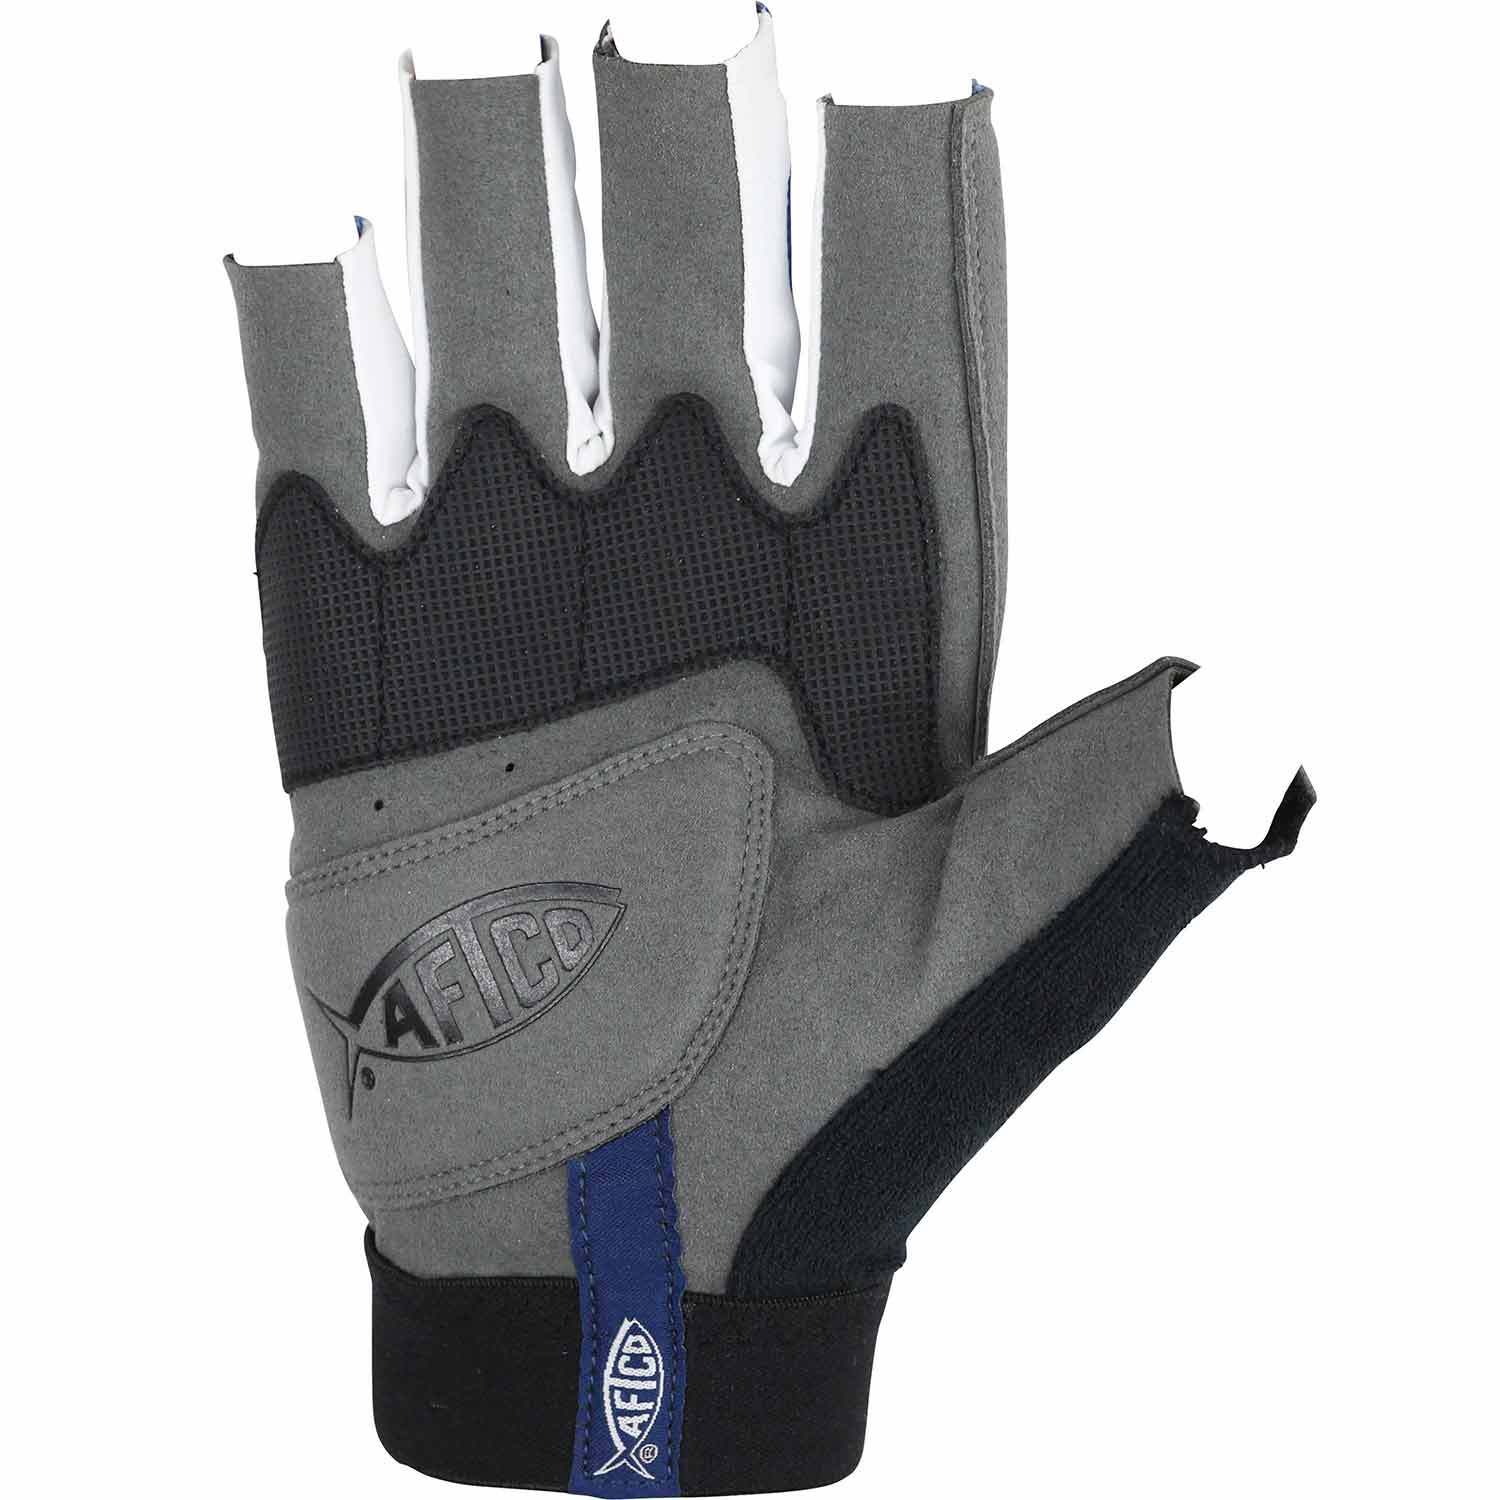 AFTCO Solmar Fishing Gloves